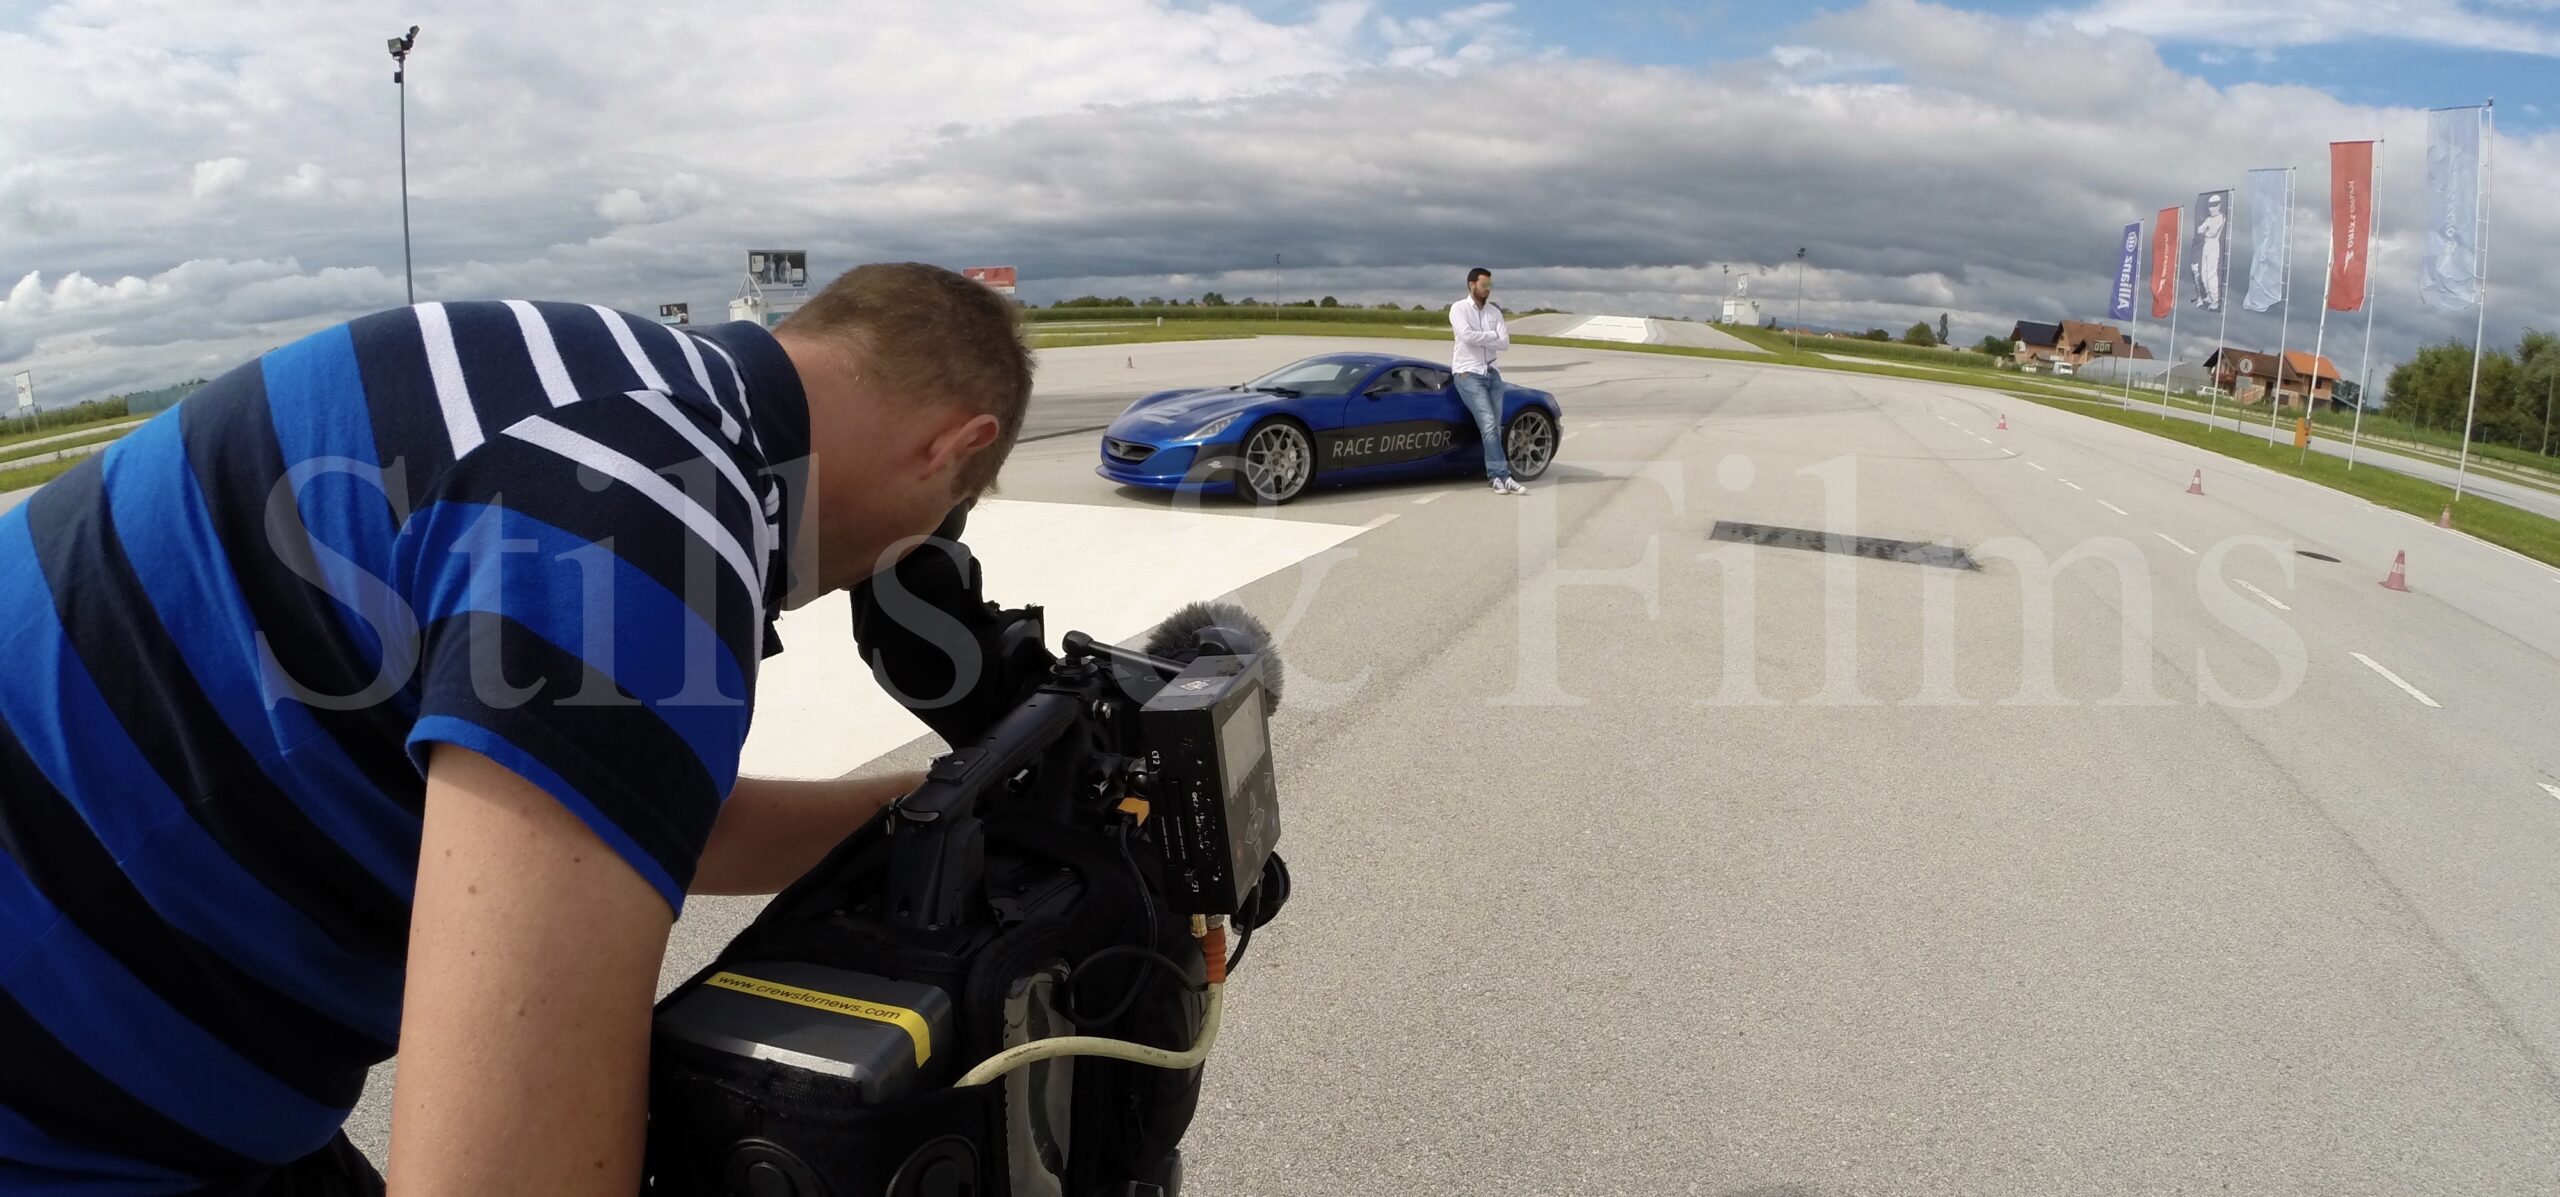 Corporate video production services provided at electric supercar producer Rimac near Zagreb, Croatia